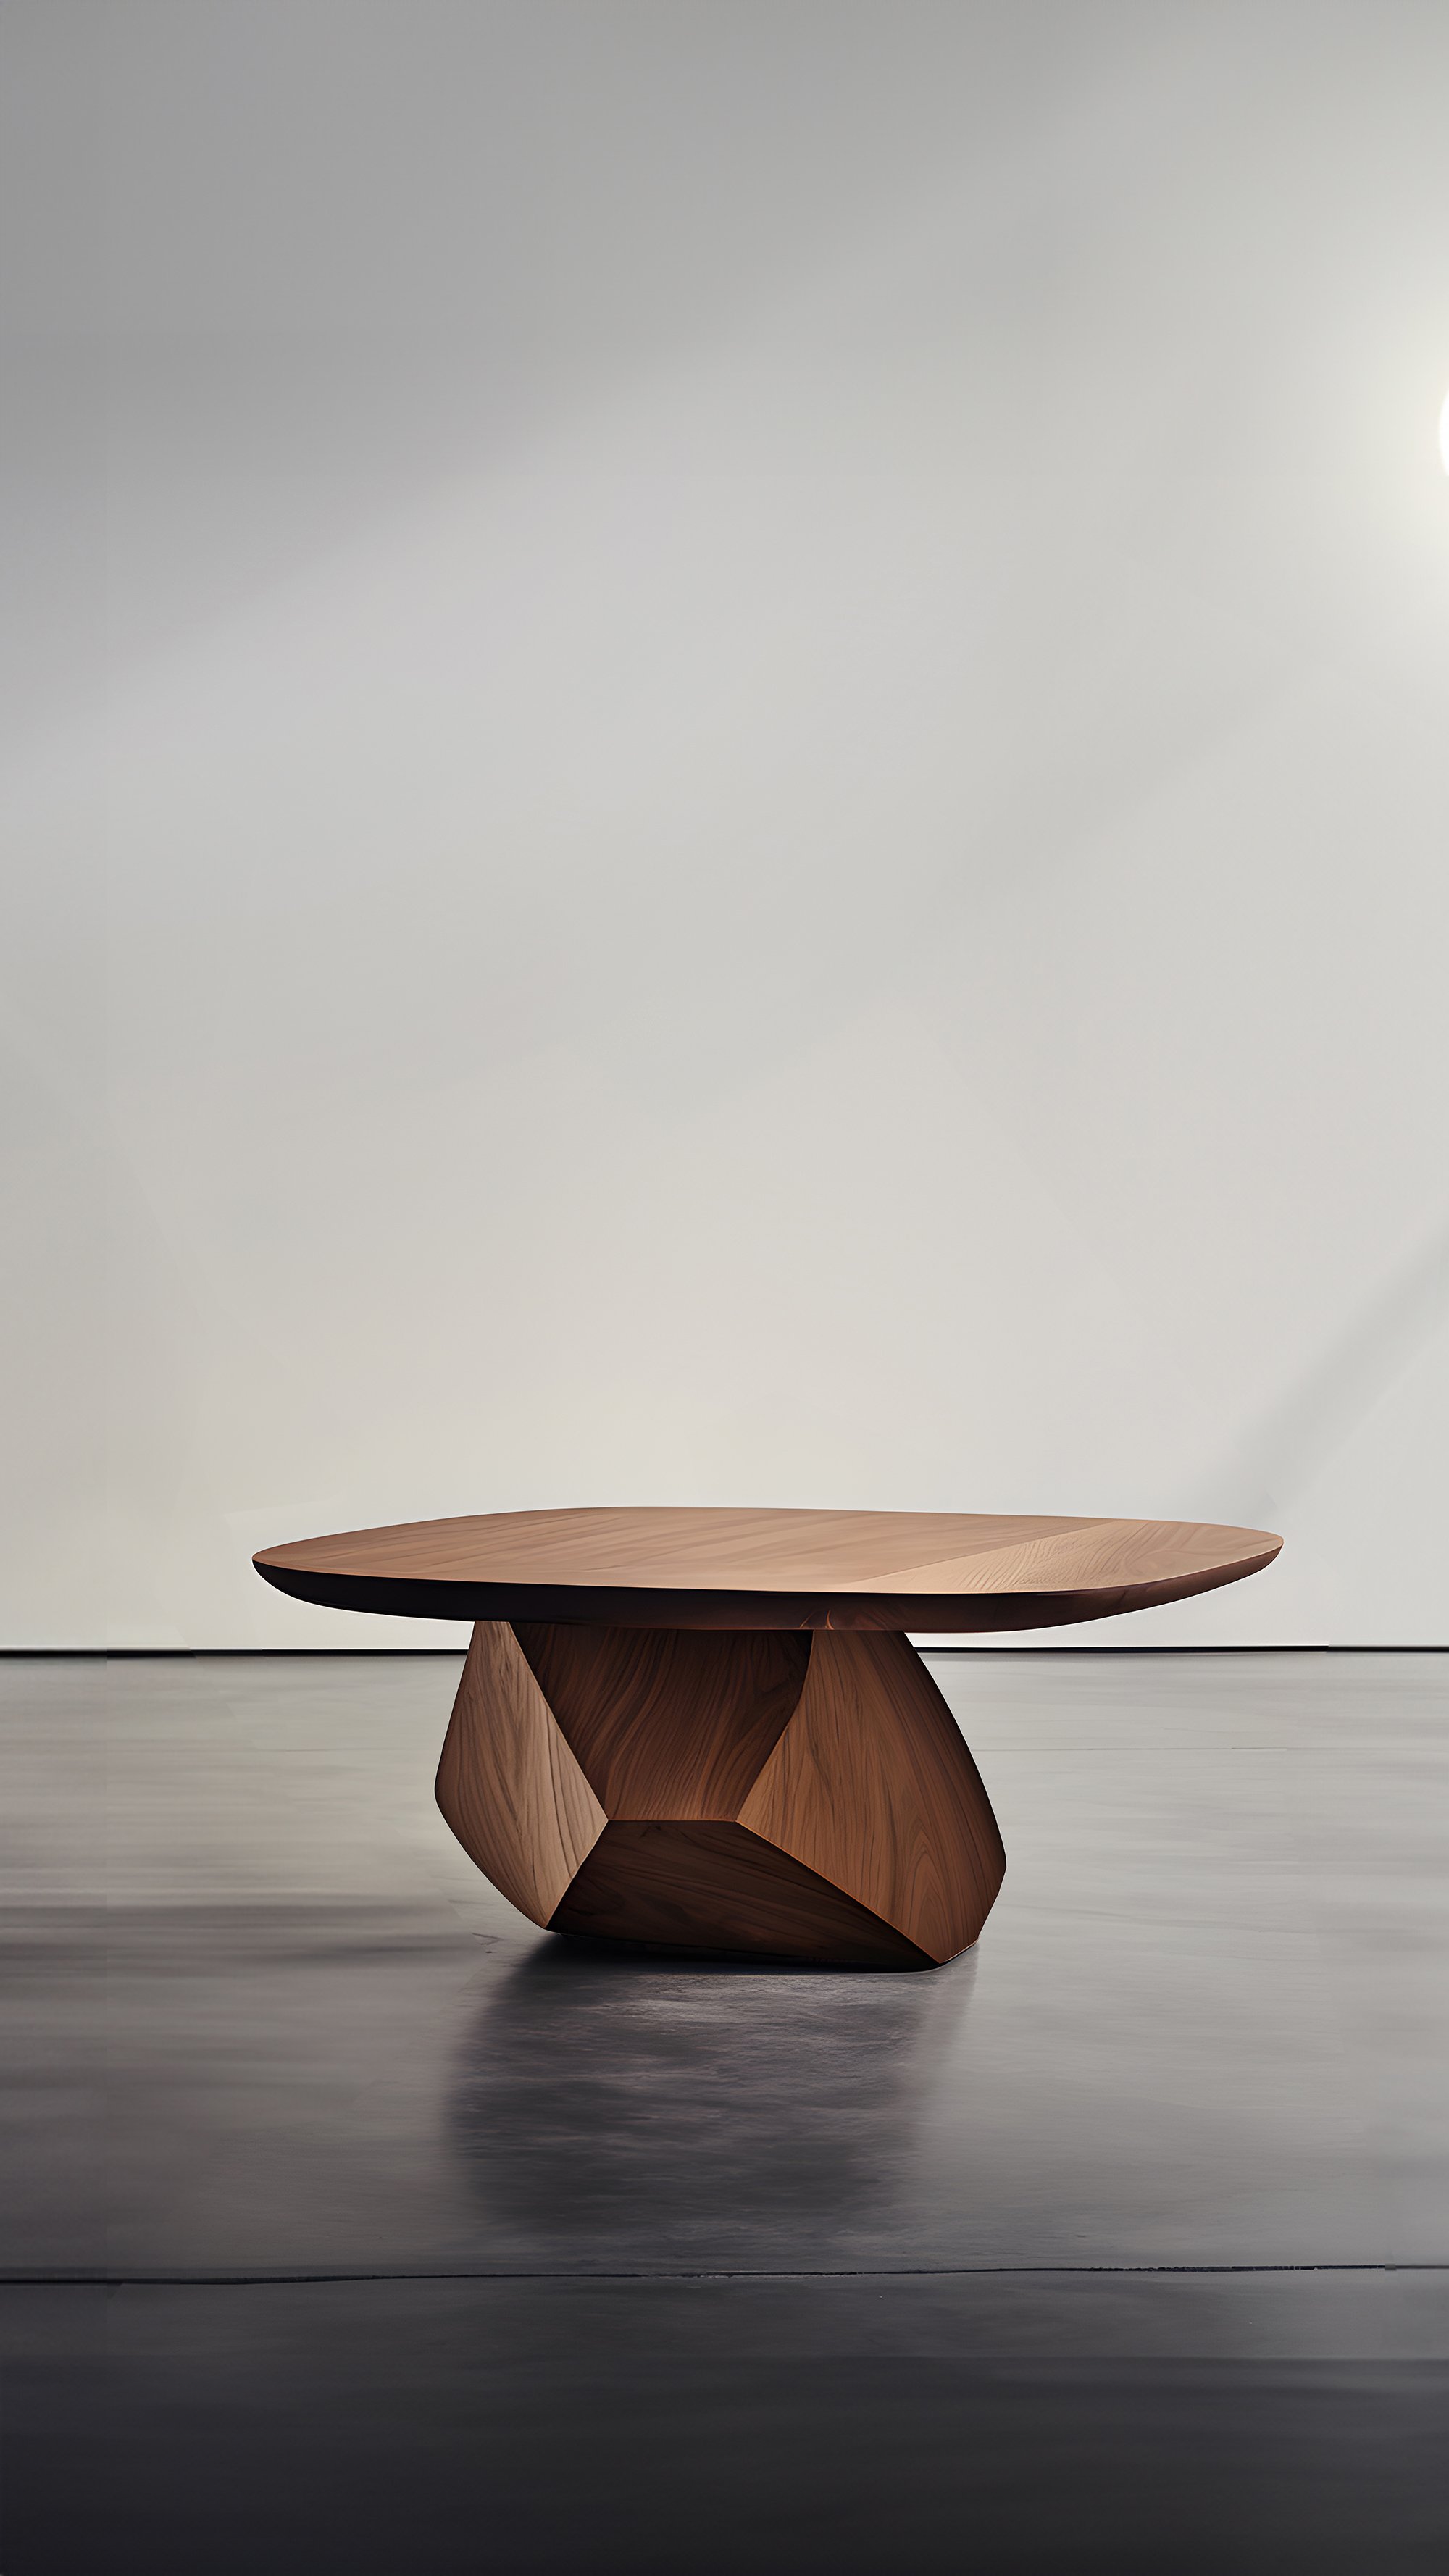 Sculptural Coffee Table Made of Solid Wood, Center Table Solace S39 by Joel Escalona — 8.jpg